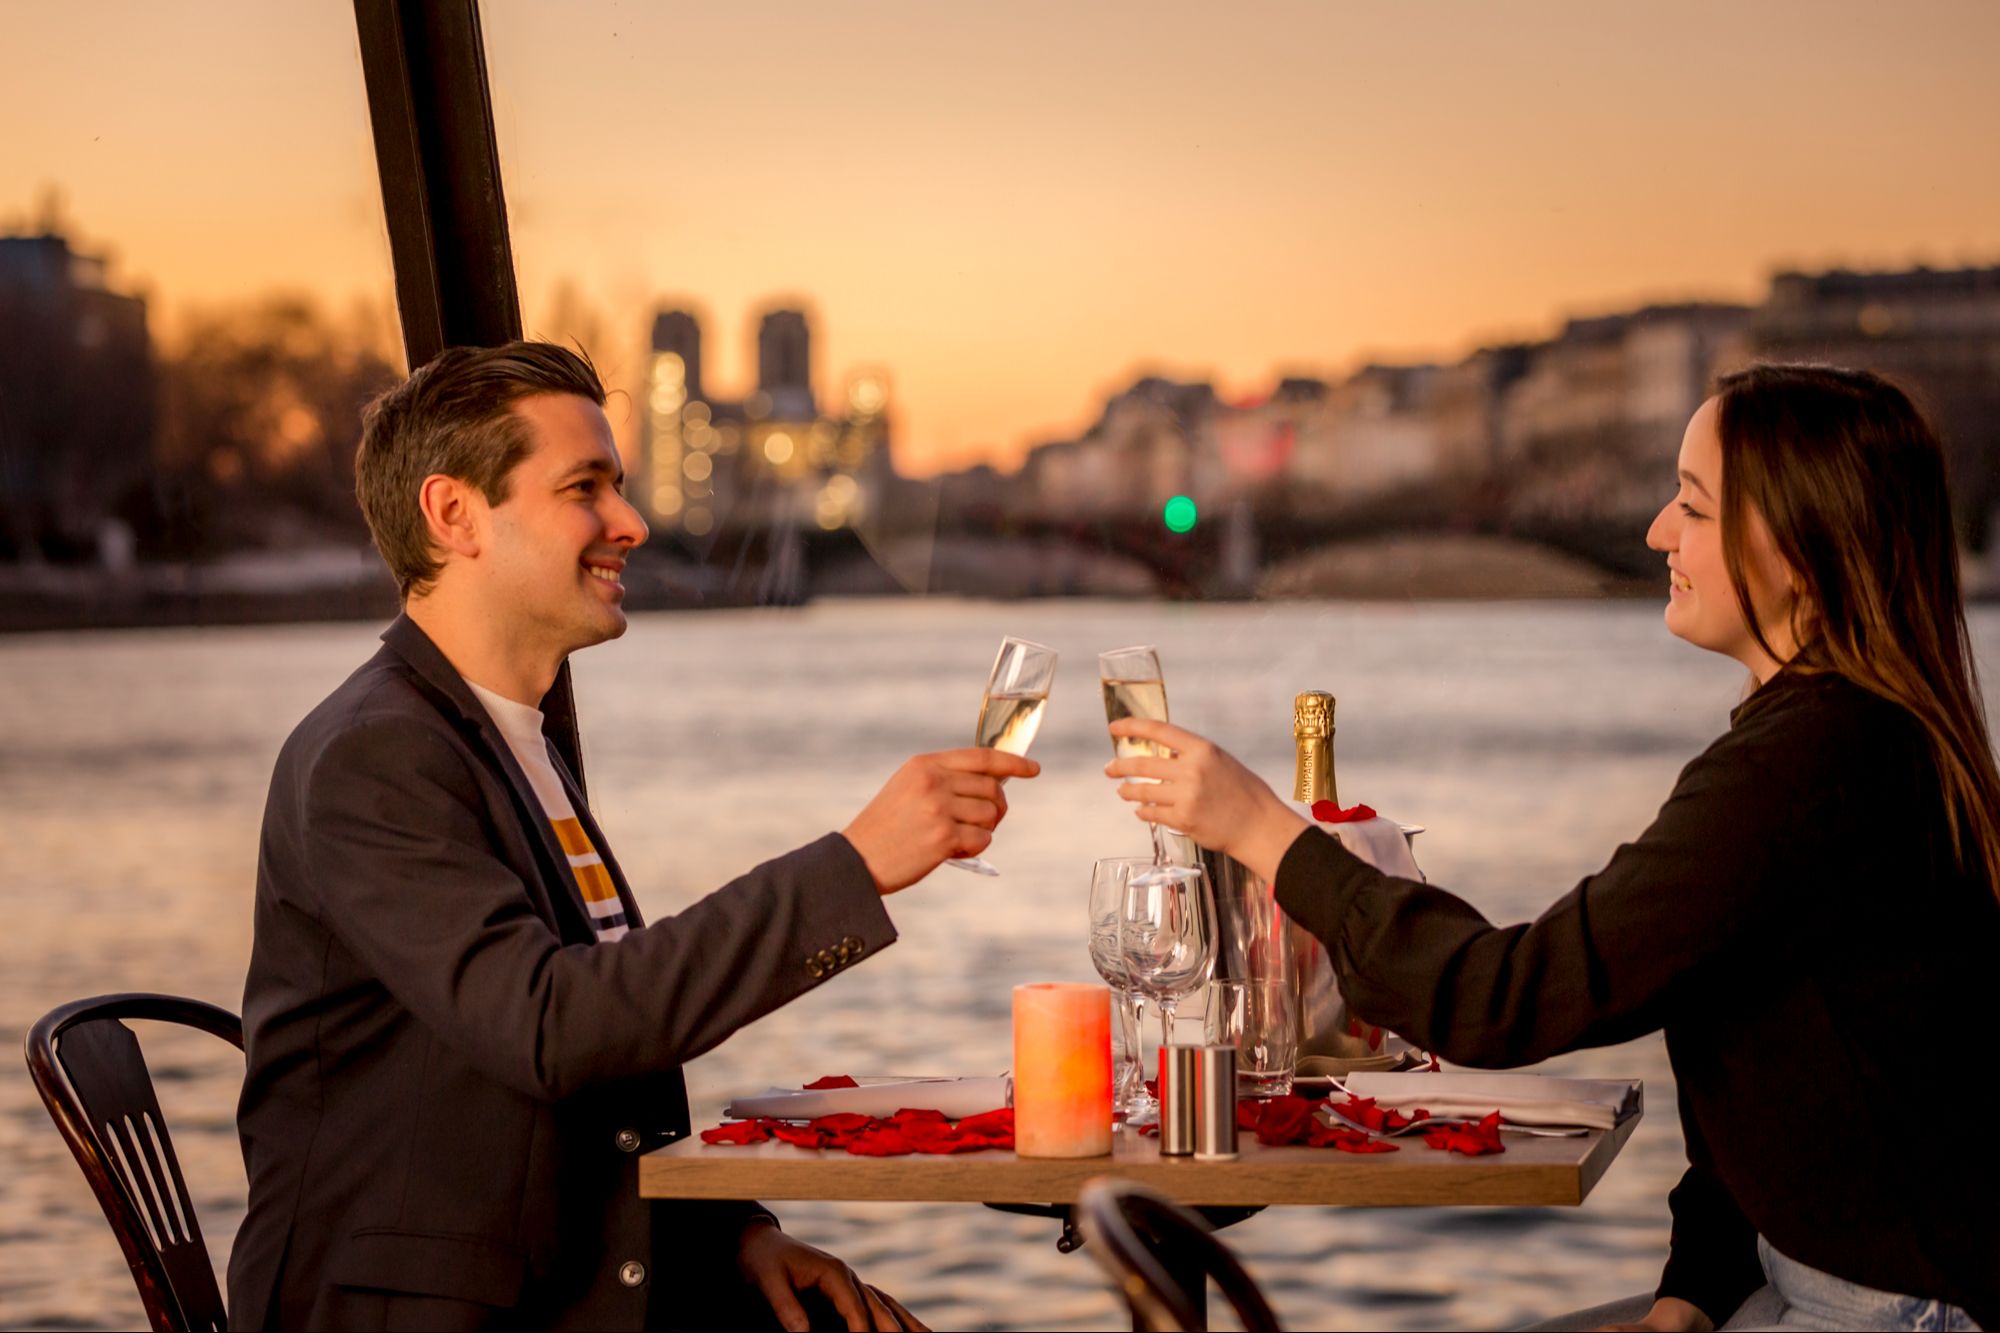 Romantic Dinner Cruise Paris Seine 6 PM, Table by the window